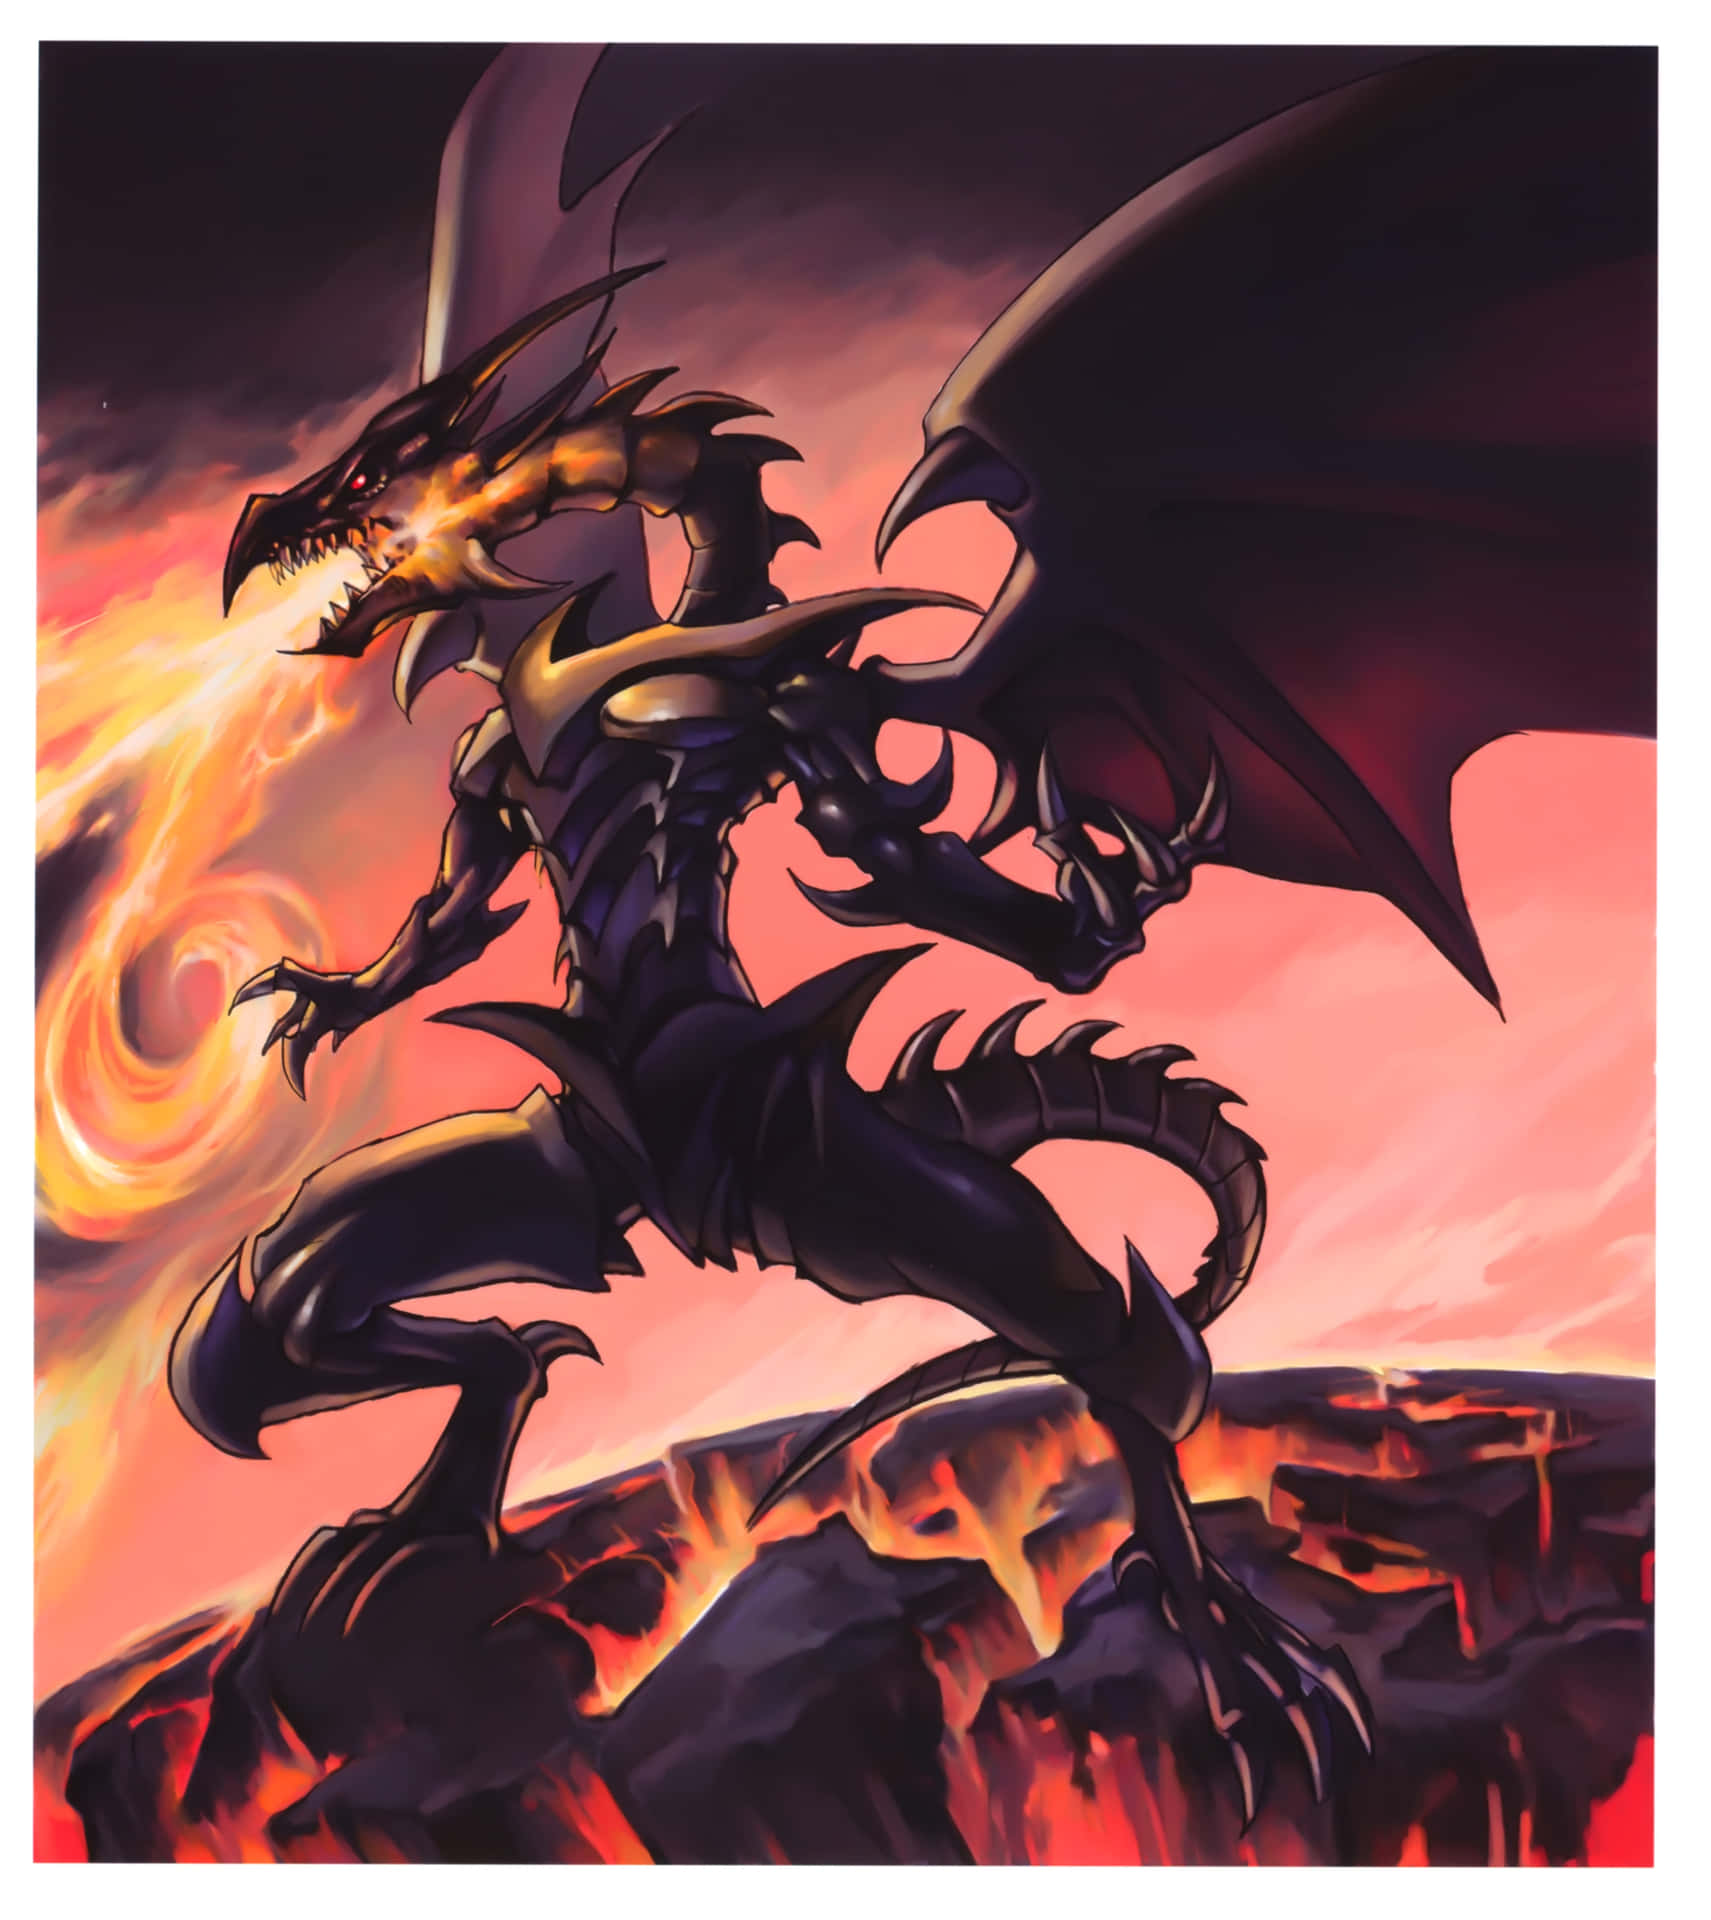 Majestic Yu-Gi-Oh! Dragons Locked in an Epic Battle Wallpaper